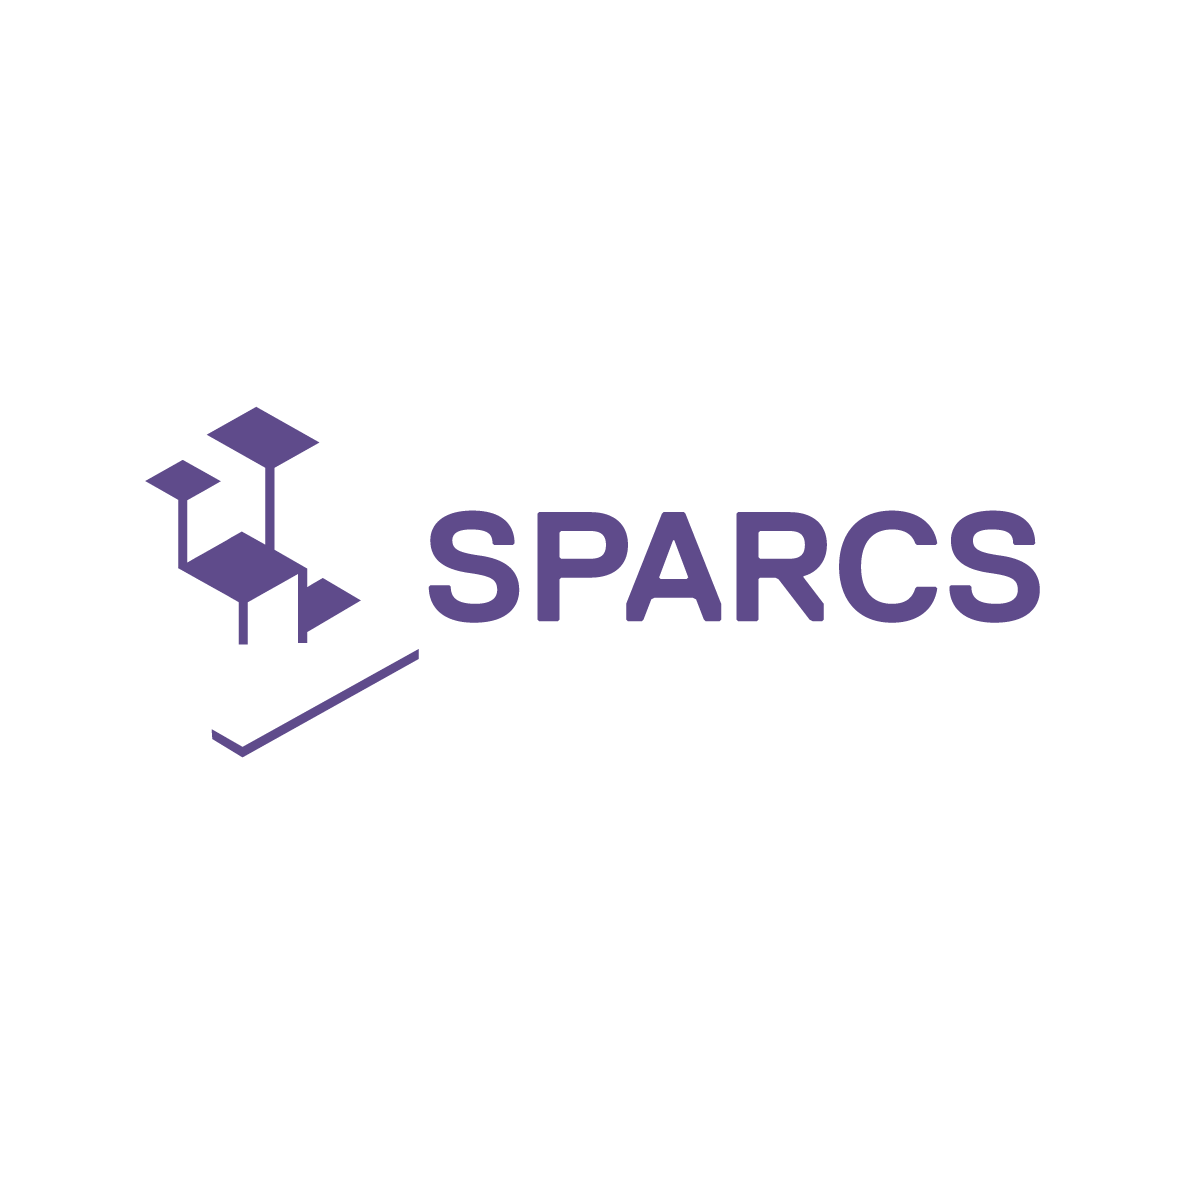 SPARCS project officially launches